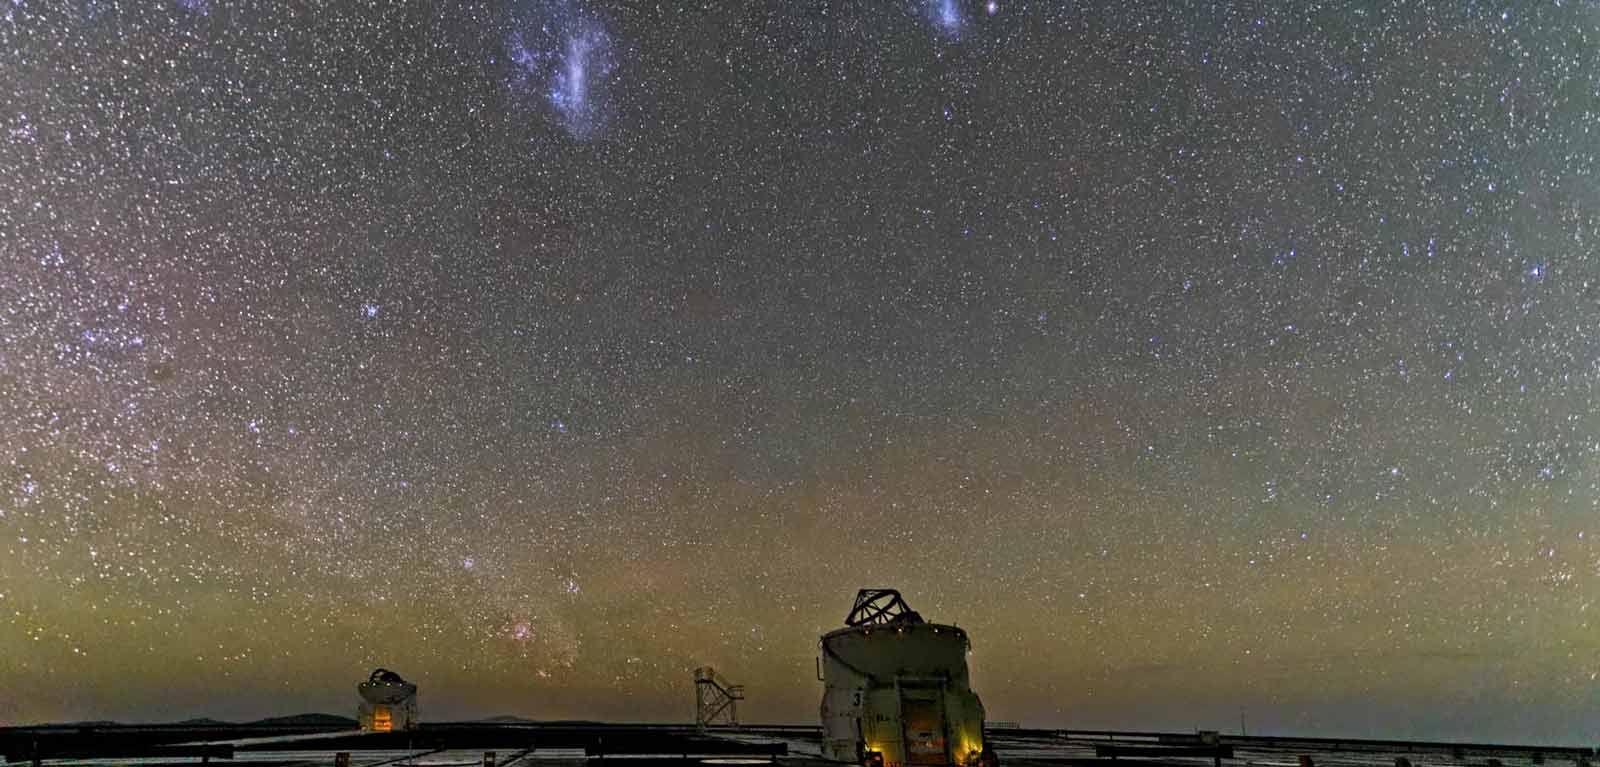 Expanse of stars seen from earth with telescope at bottom